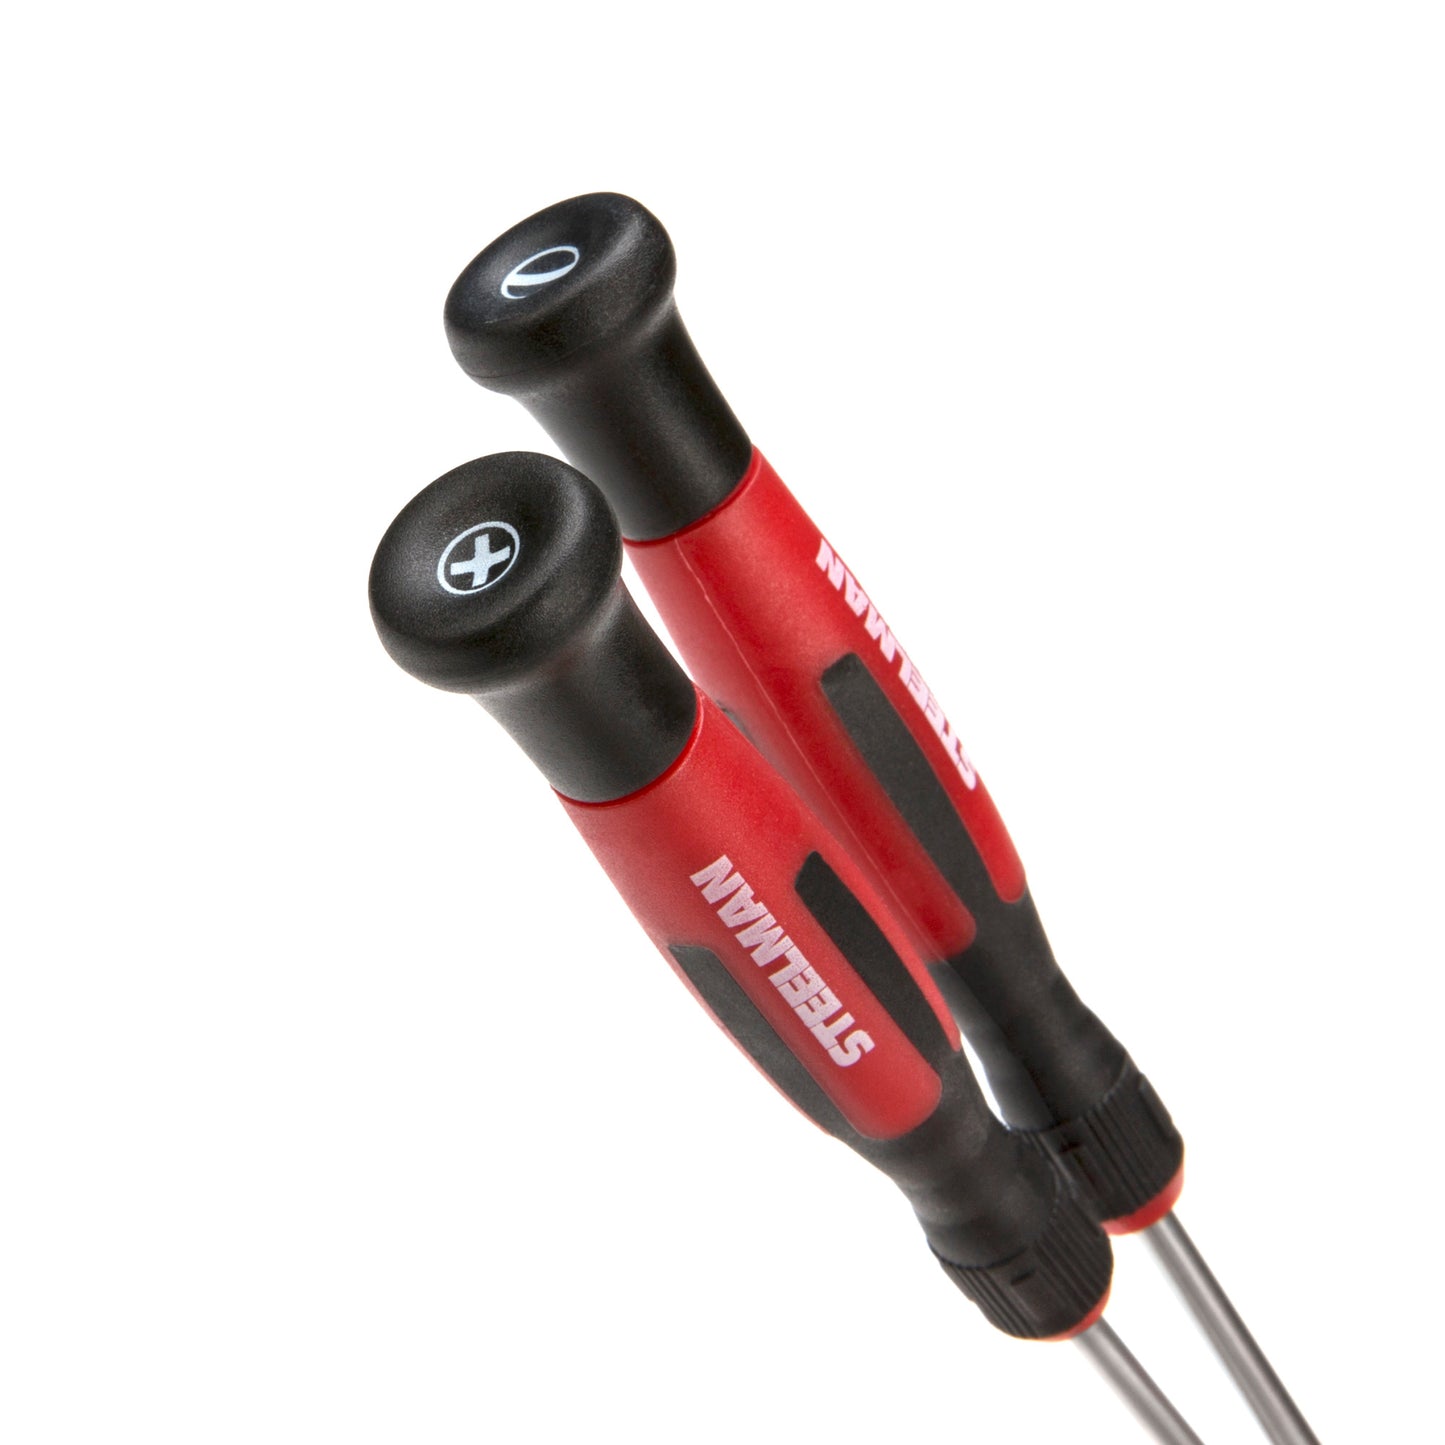 Long Reach Precision Phillips and Slotted Screwdriver Set, 6-piece